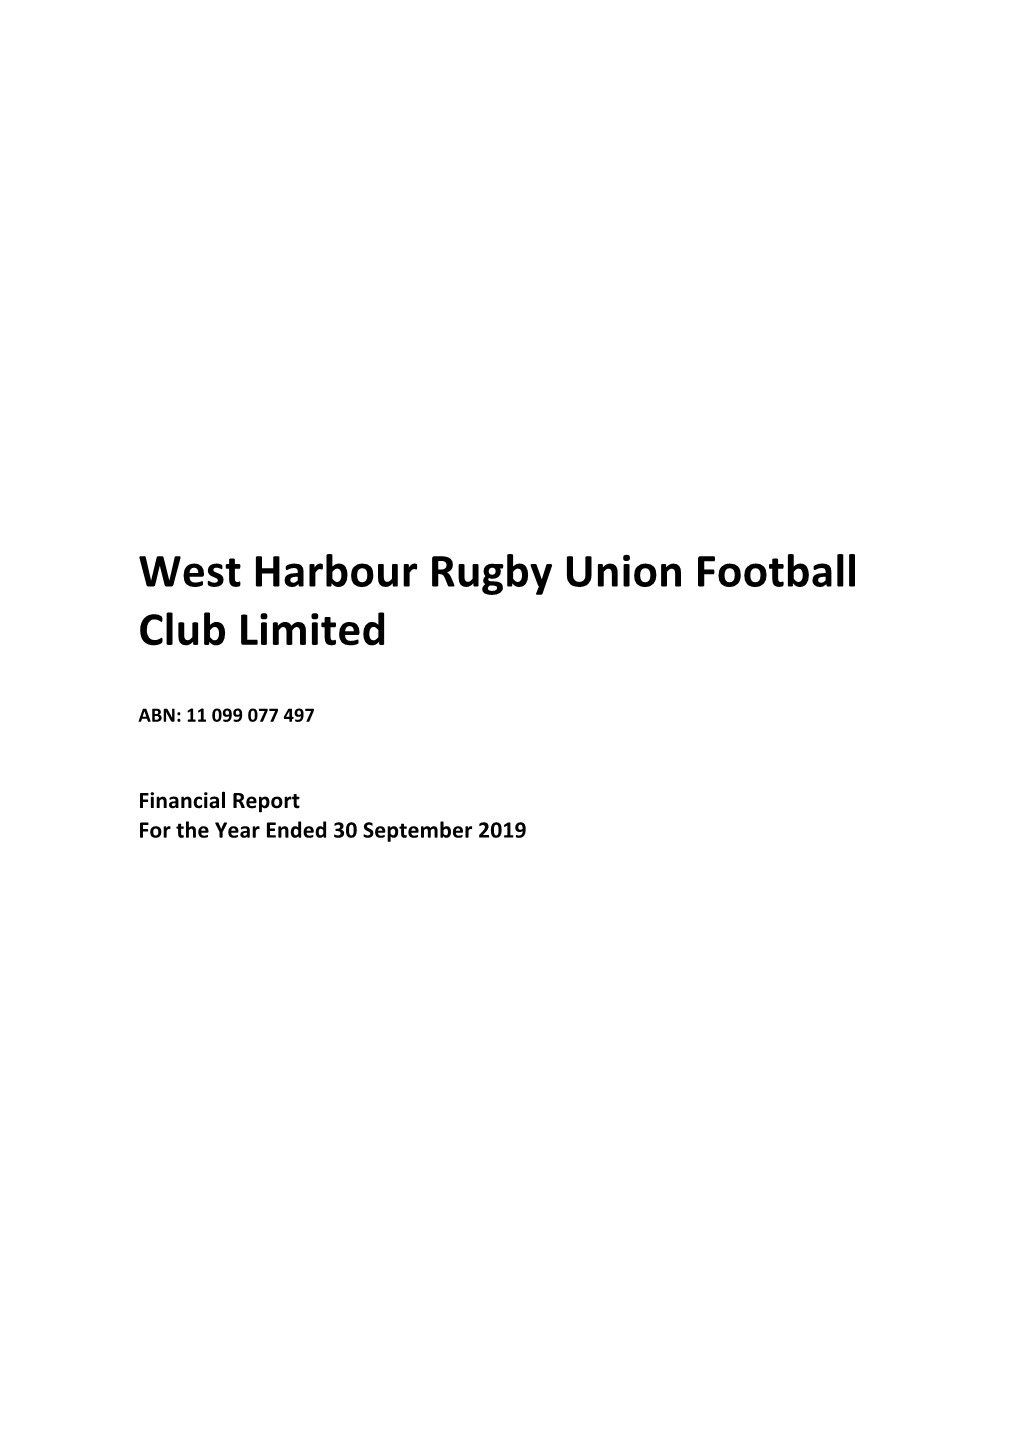 West Harbour Rugby Union Football Club Limited